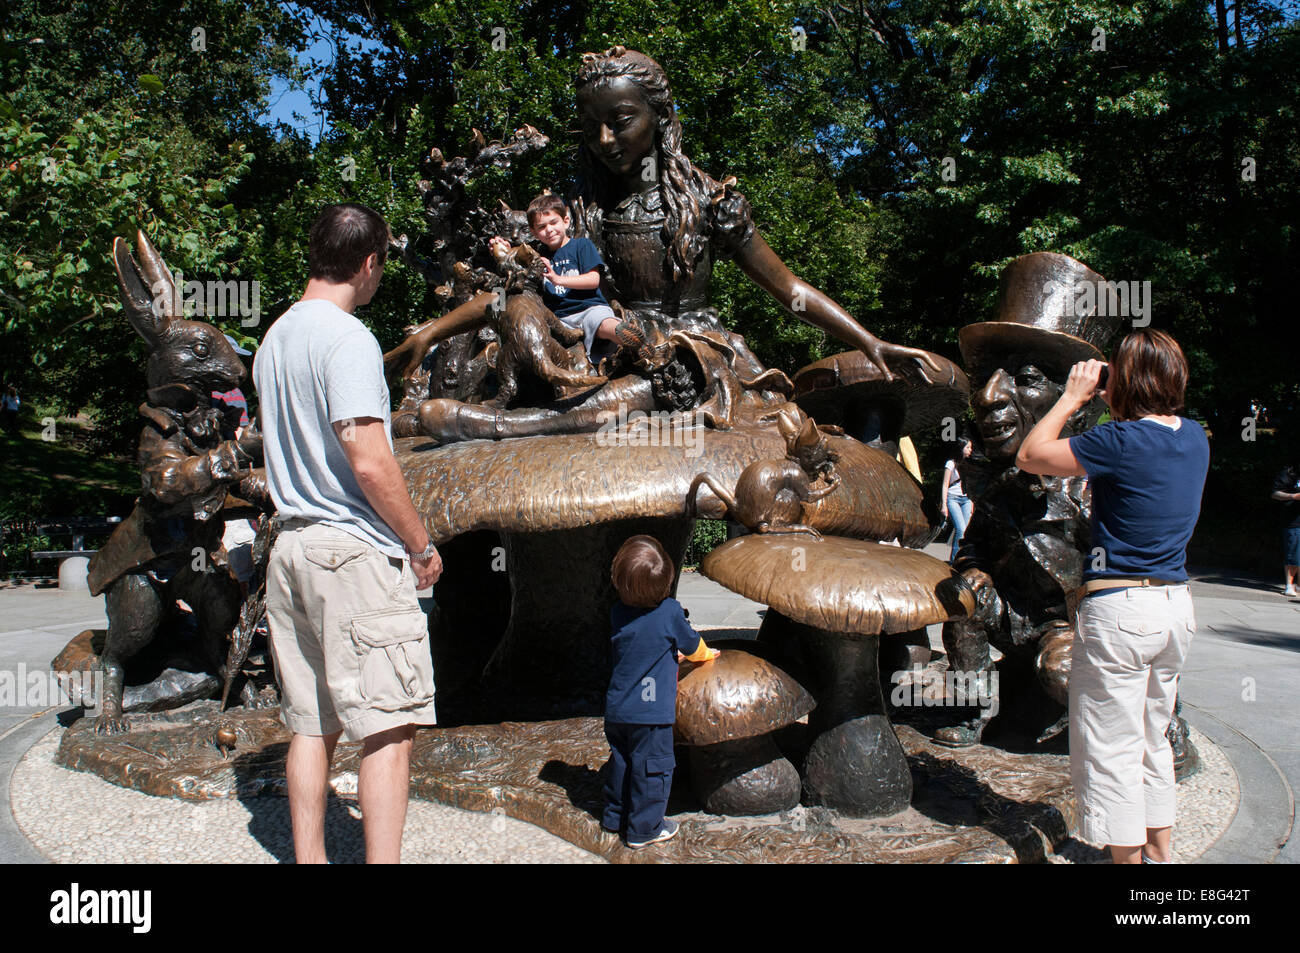 Children playing on Alice in Wonderland monument, Central Park, New York City. Alice and her cast of storybook friends found the Stock Photo